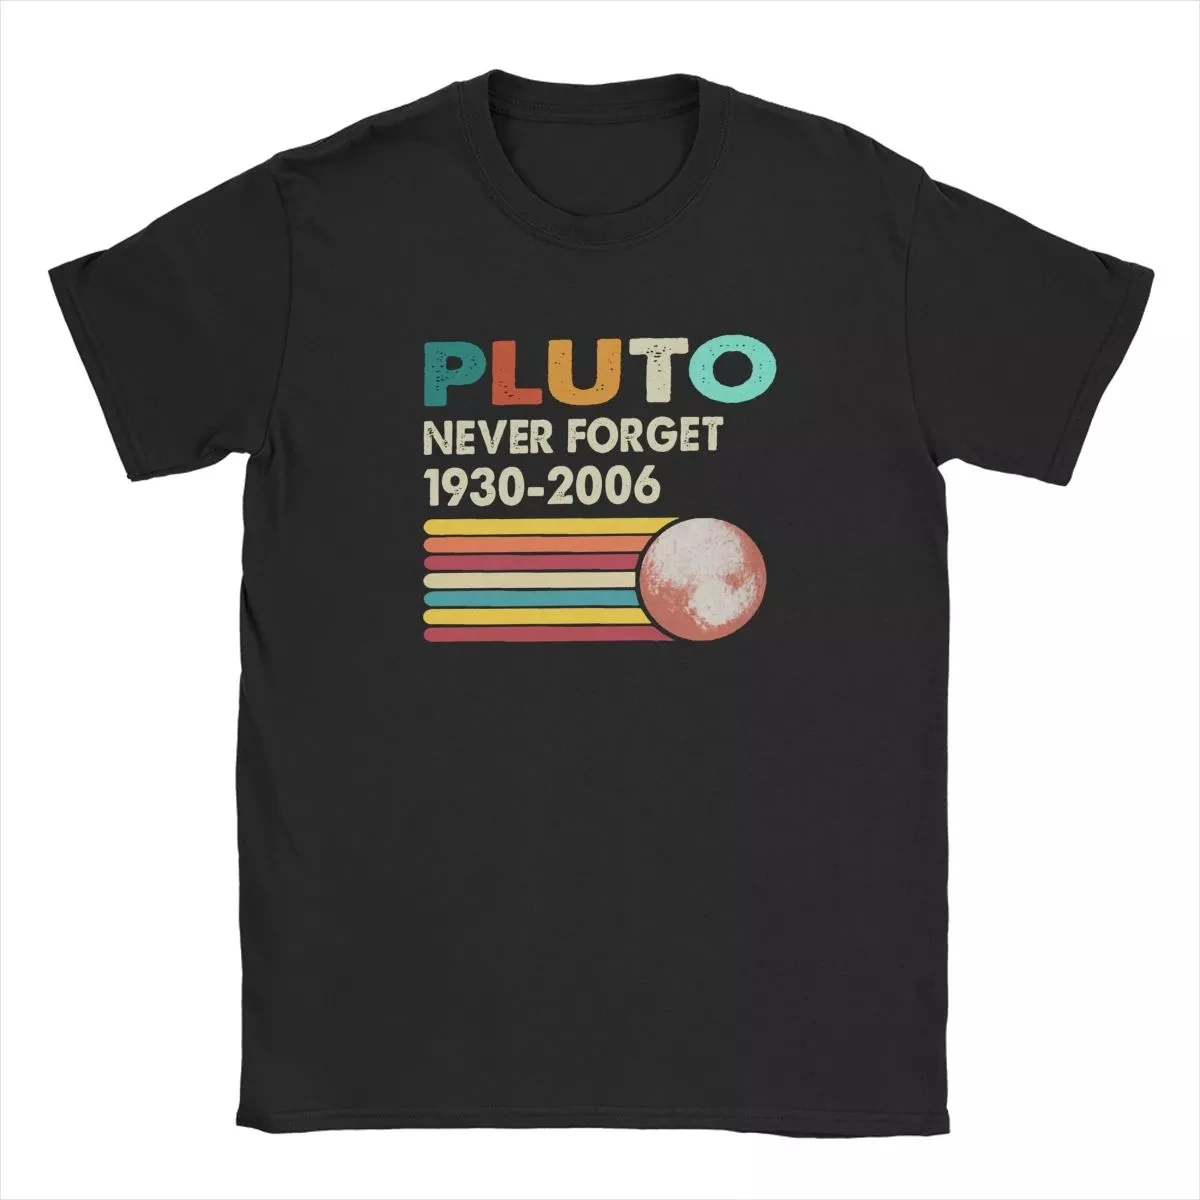 

Men's Pluto Never Forget 1930 2006 Retro Style Funny Space Science T Shirts 100% Cotton Tops Vintage Tees Gift Idea T-Shirt